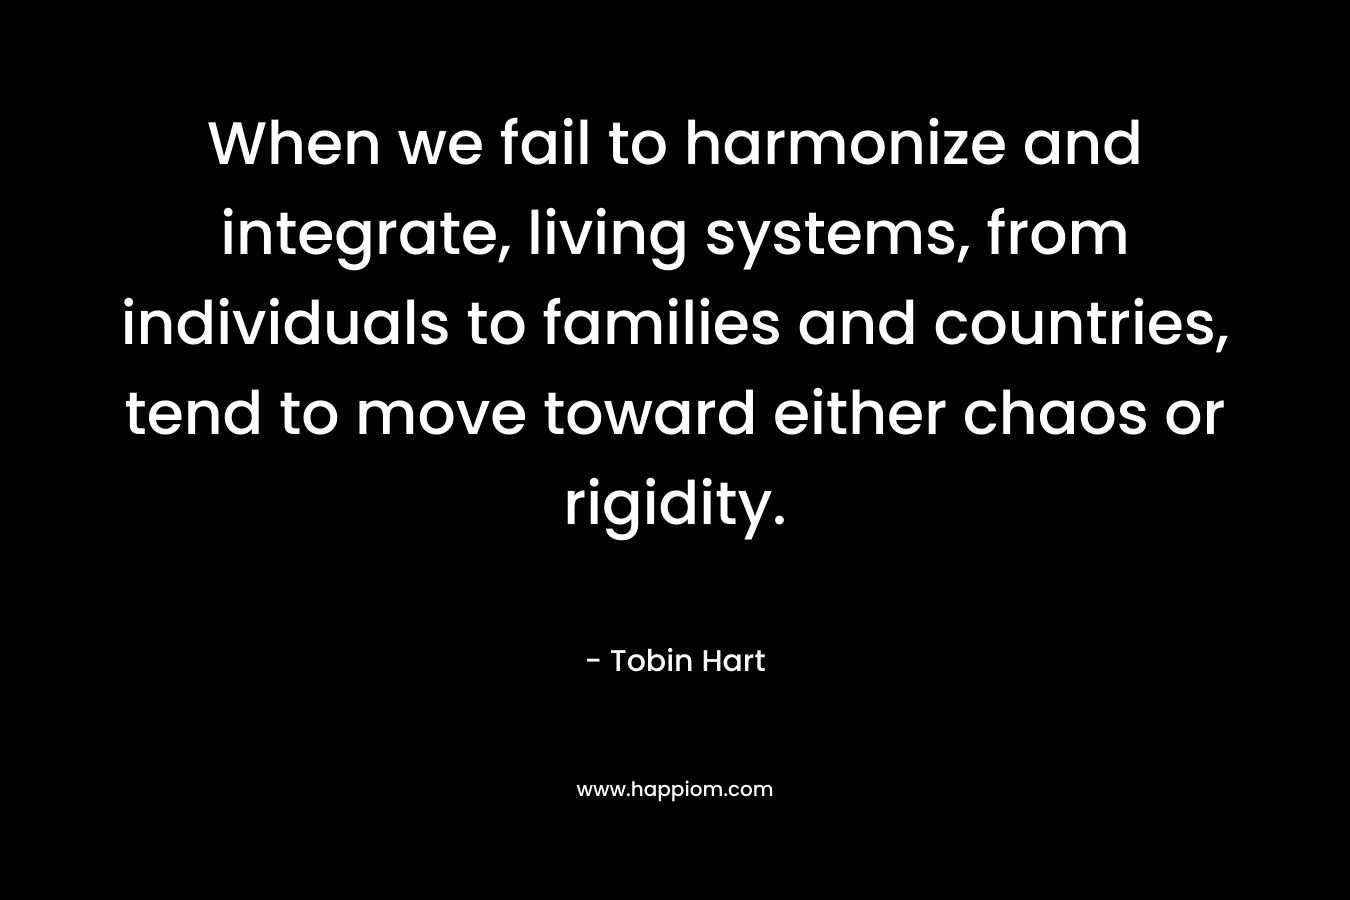 When we fail to harmonize and integrate, living systems, from individuals to families and countries, tend to move toward either chaos or rigidity. – Tobin Hart